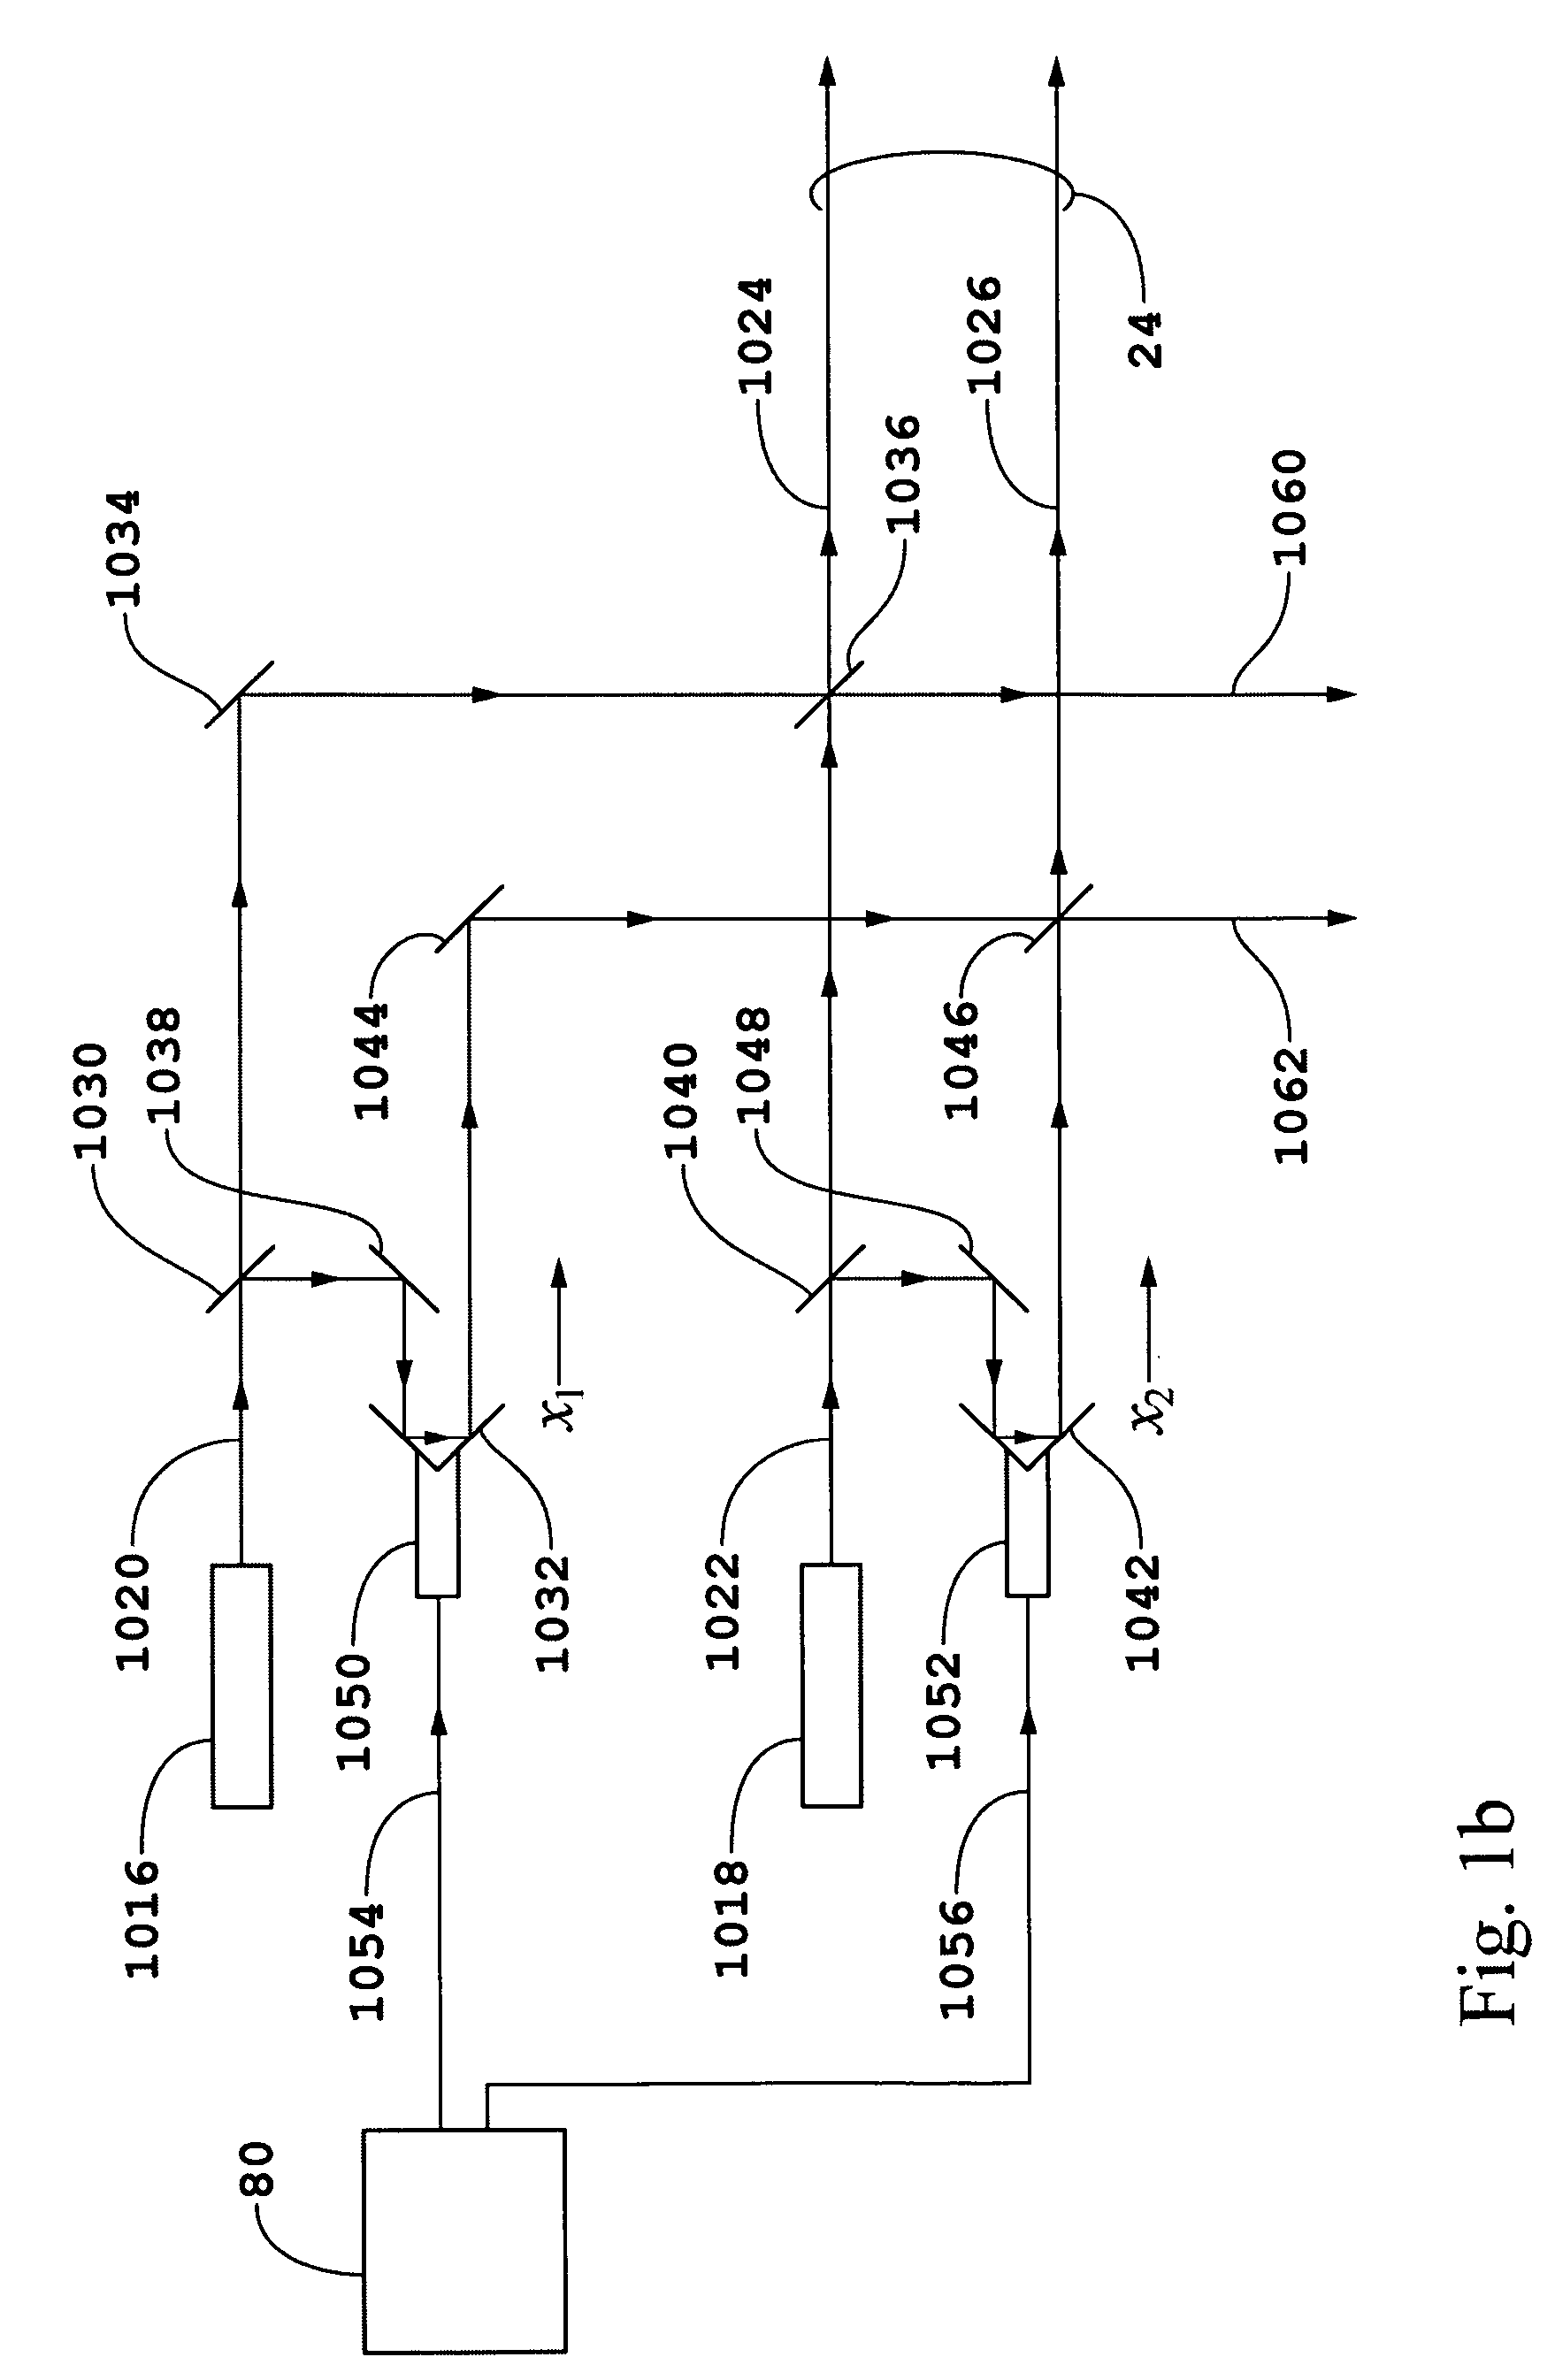 Apparatus and methods for overlay, alignment mark, and critical dimension metrologies based on optical interferometry